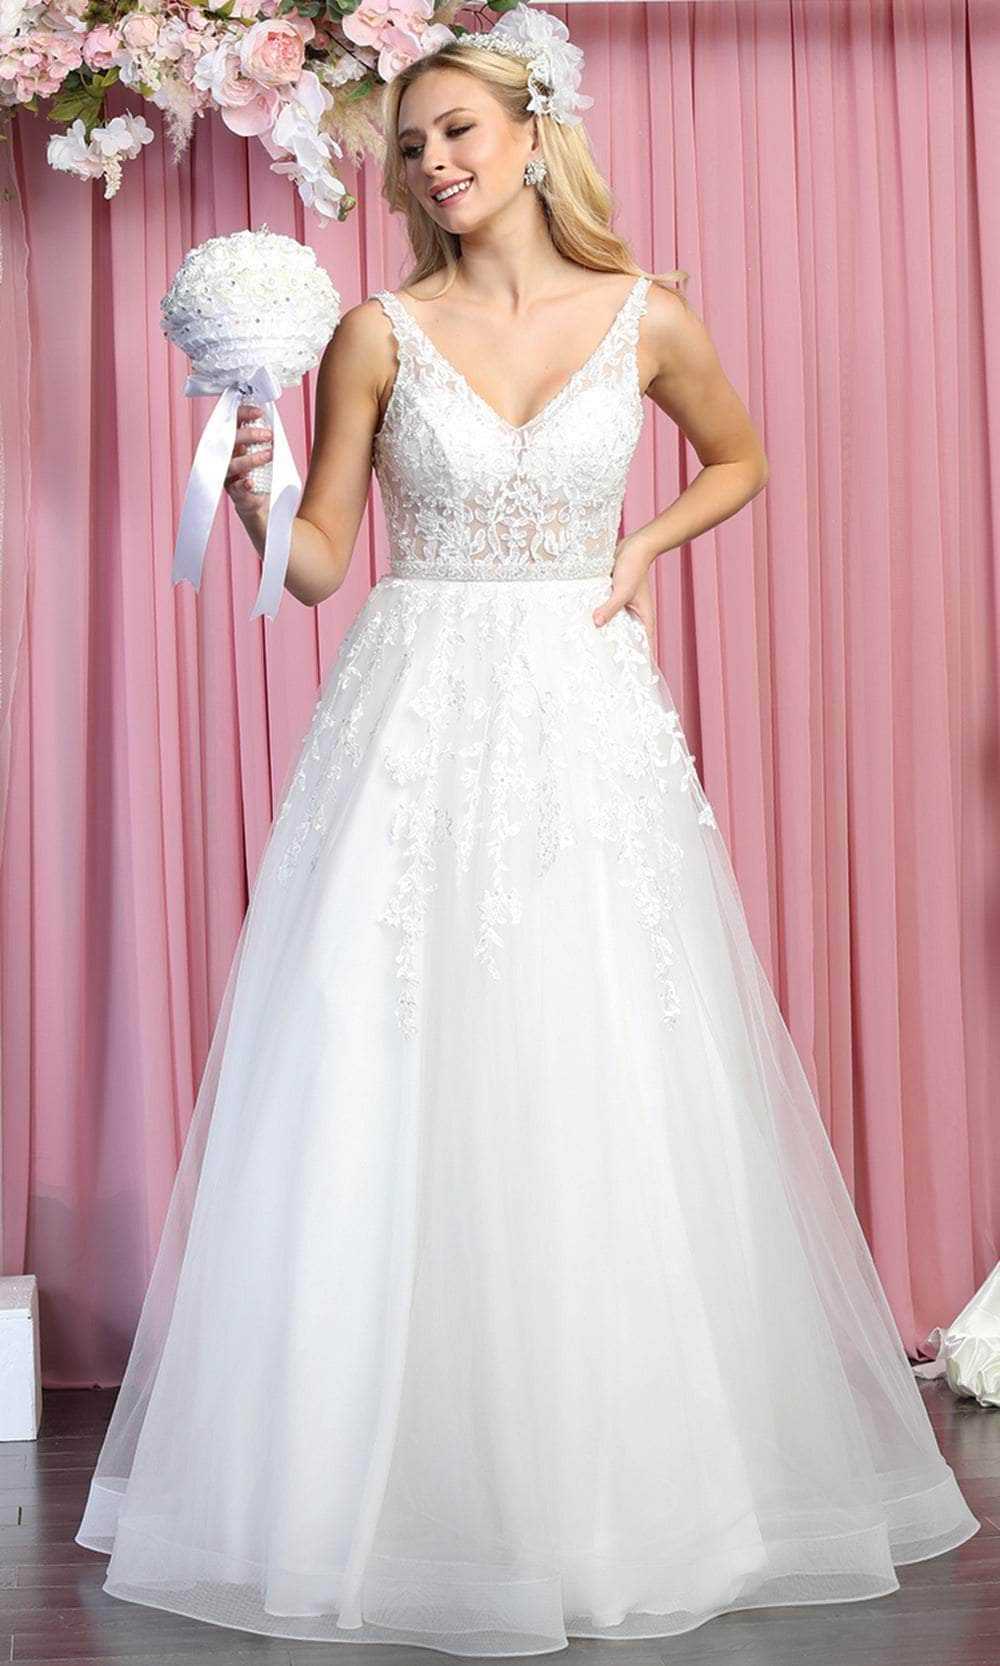 May Queen, May Queen RQ7888 - Sleeveless Sheer V-neck Wedding Gown